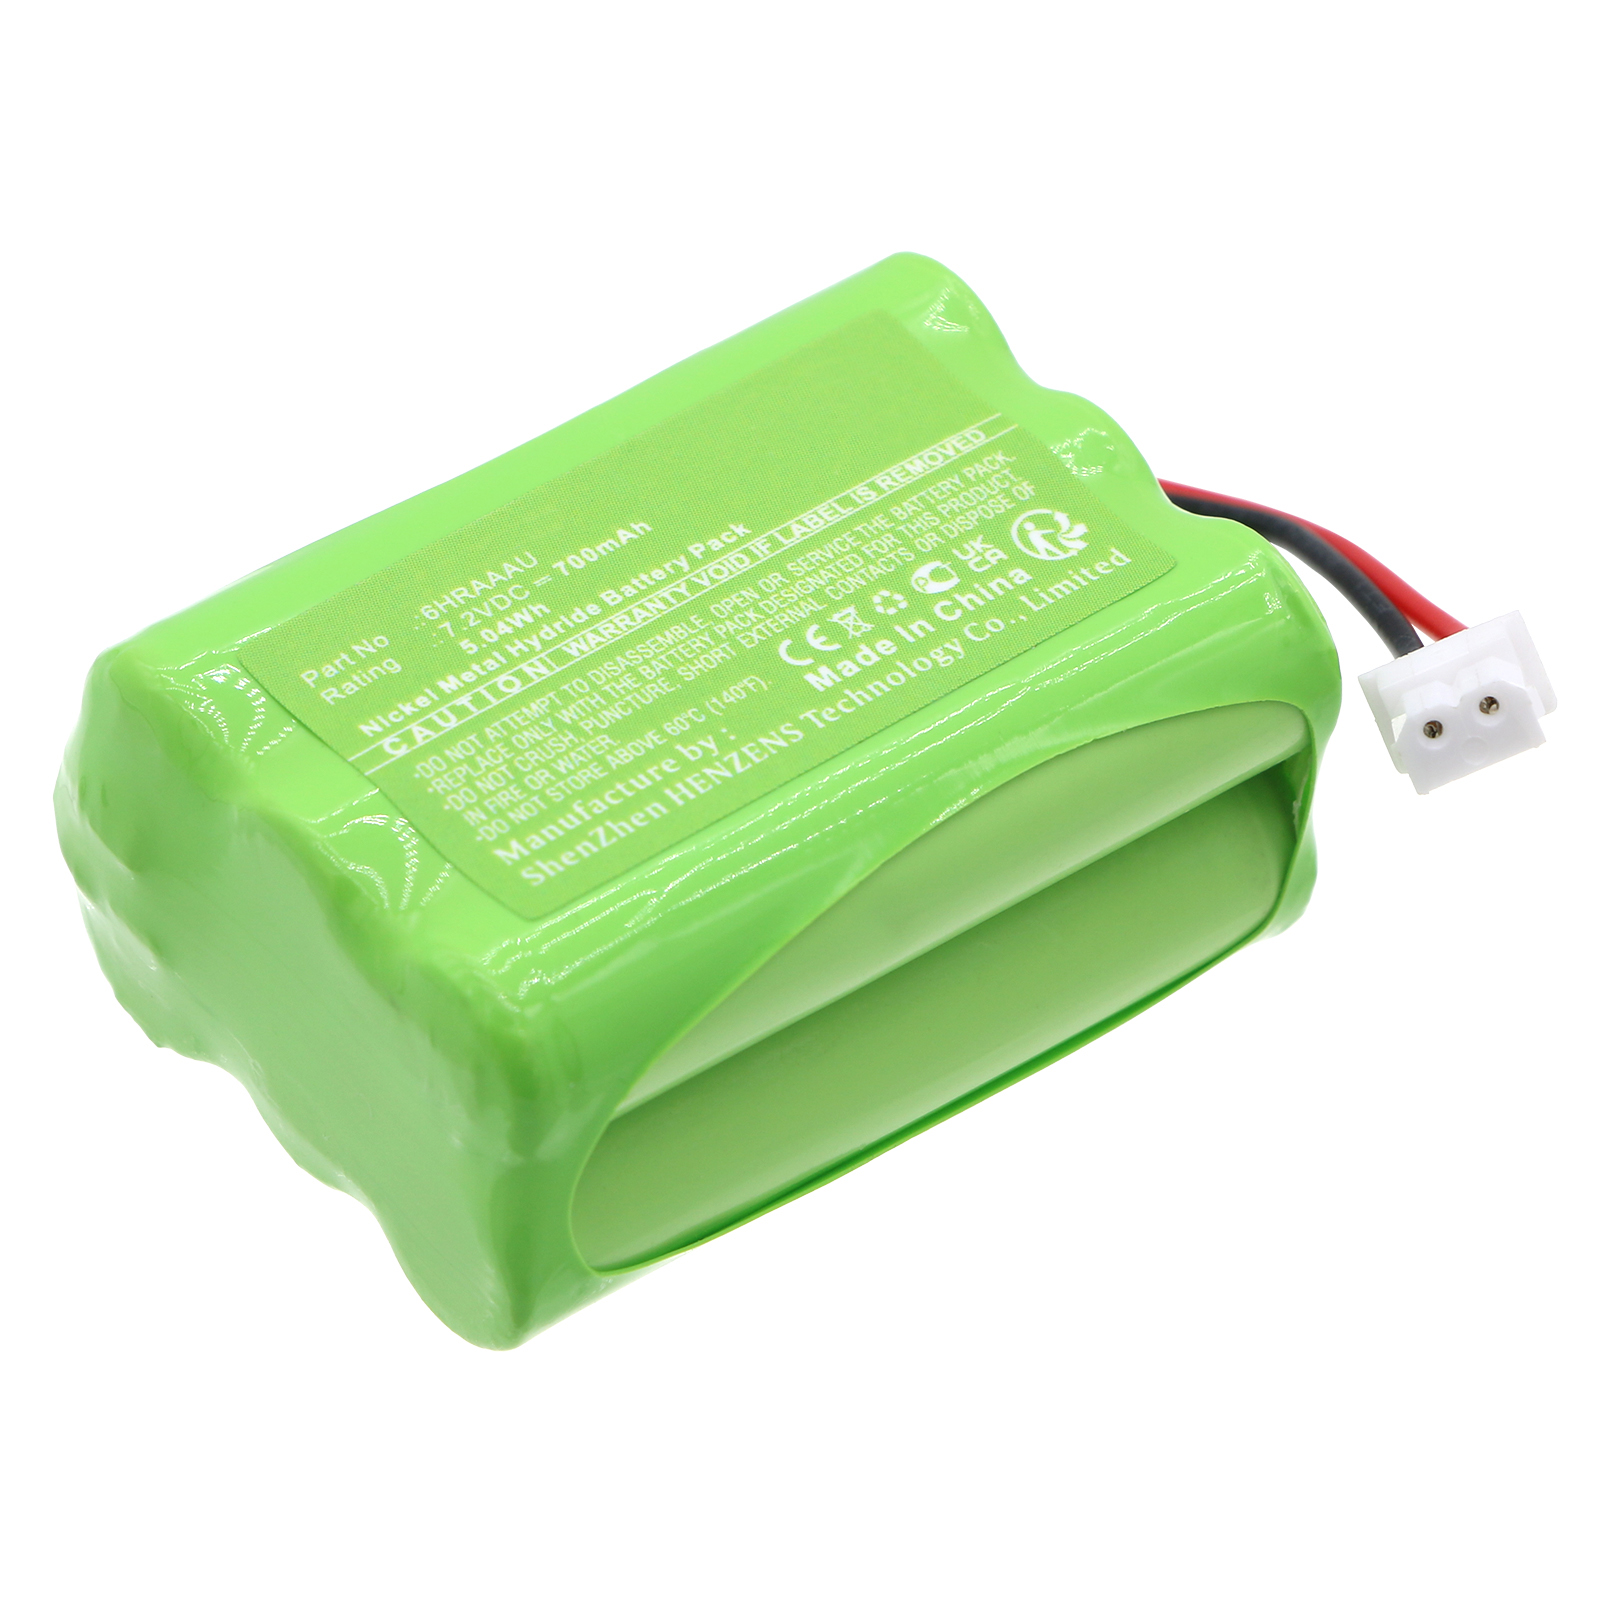 Batteries for ITIAlarm System